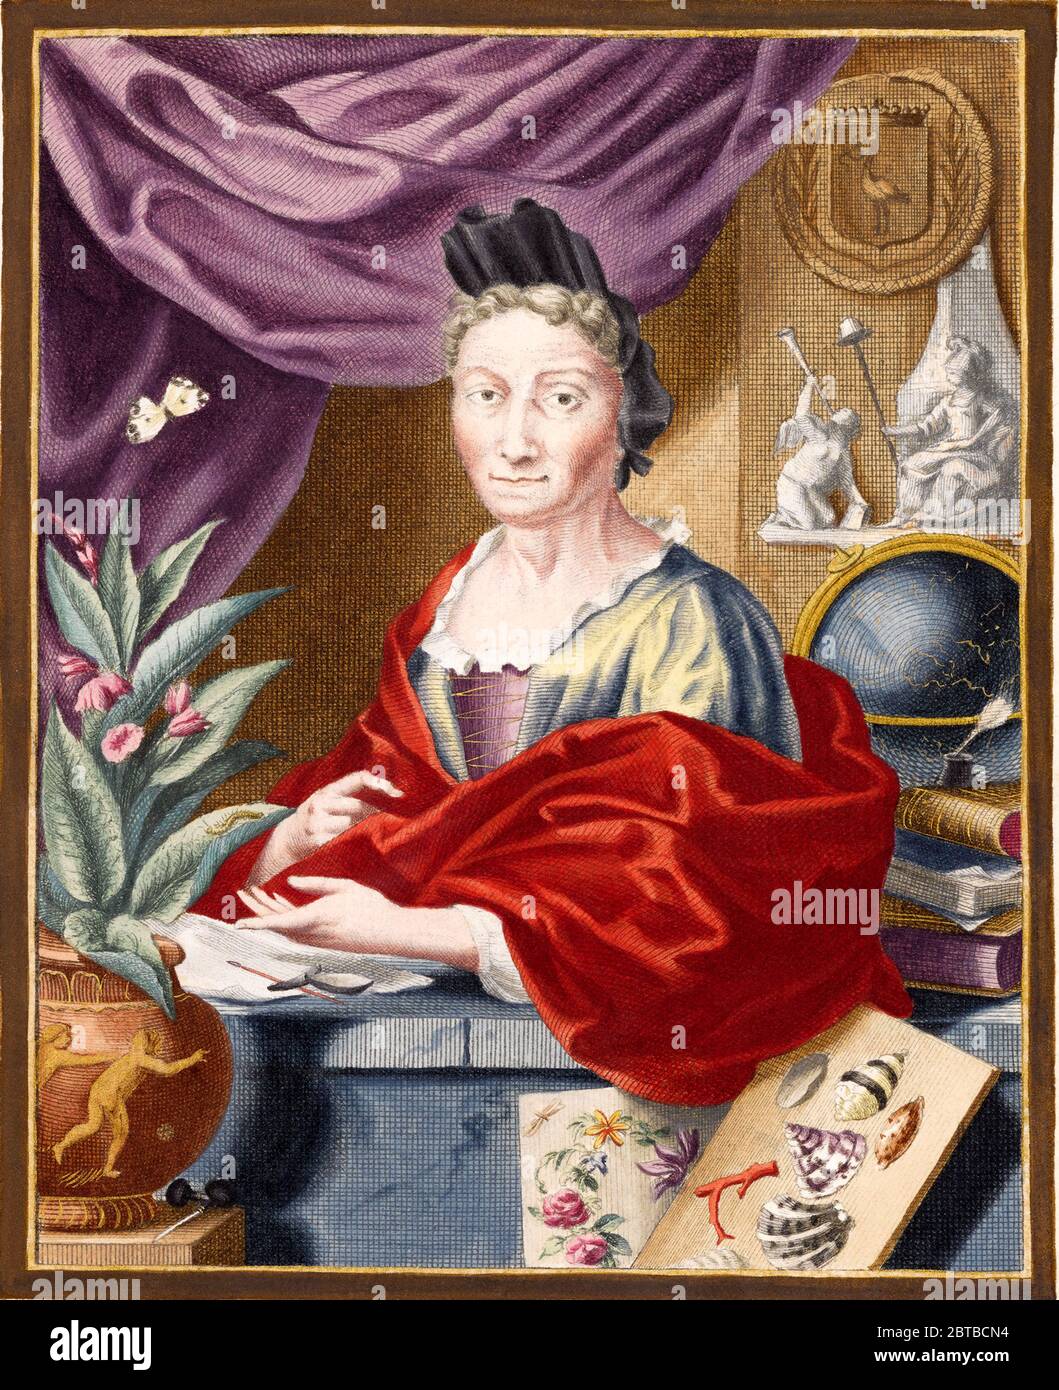 1705 , GERMANY : The german naturalist woman painter , scientific illustrator and biologist MARIA SIBYLLA MERIAN ( 1647 - 1717 ). Sybylla's father was the Swiss engraver and pubblisher Matthäus Merian ( Matthew , 1593 - 1650 ) the Elder . Portrait by Jacob Houbraken, after Georg Gsell, via , frontespice from the Sibylla's book ' Metamorphosis insectorum Surinamensium ', Amsterdam , 1705 . - SYBILLA - HISTORY - foto storica storiche - portrait - ritratto - NATURALISTA - NATURALIST - SCIENZA - SCIENCE - BIOLOGY - BIOLOGIA - illustratrice - illustratore - illustrator - woman painter - pittrice - Stock Photo